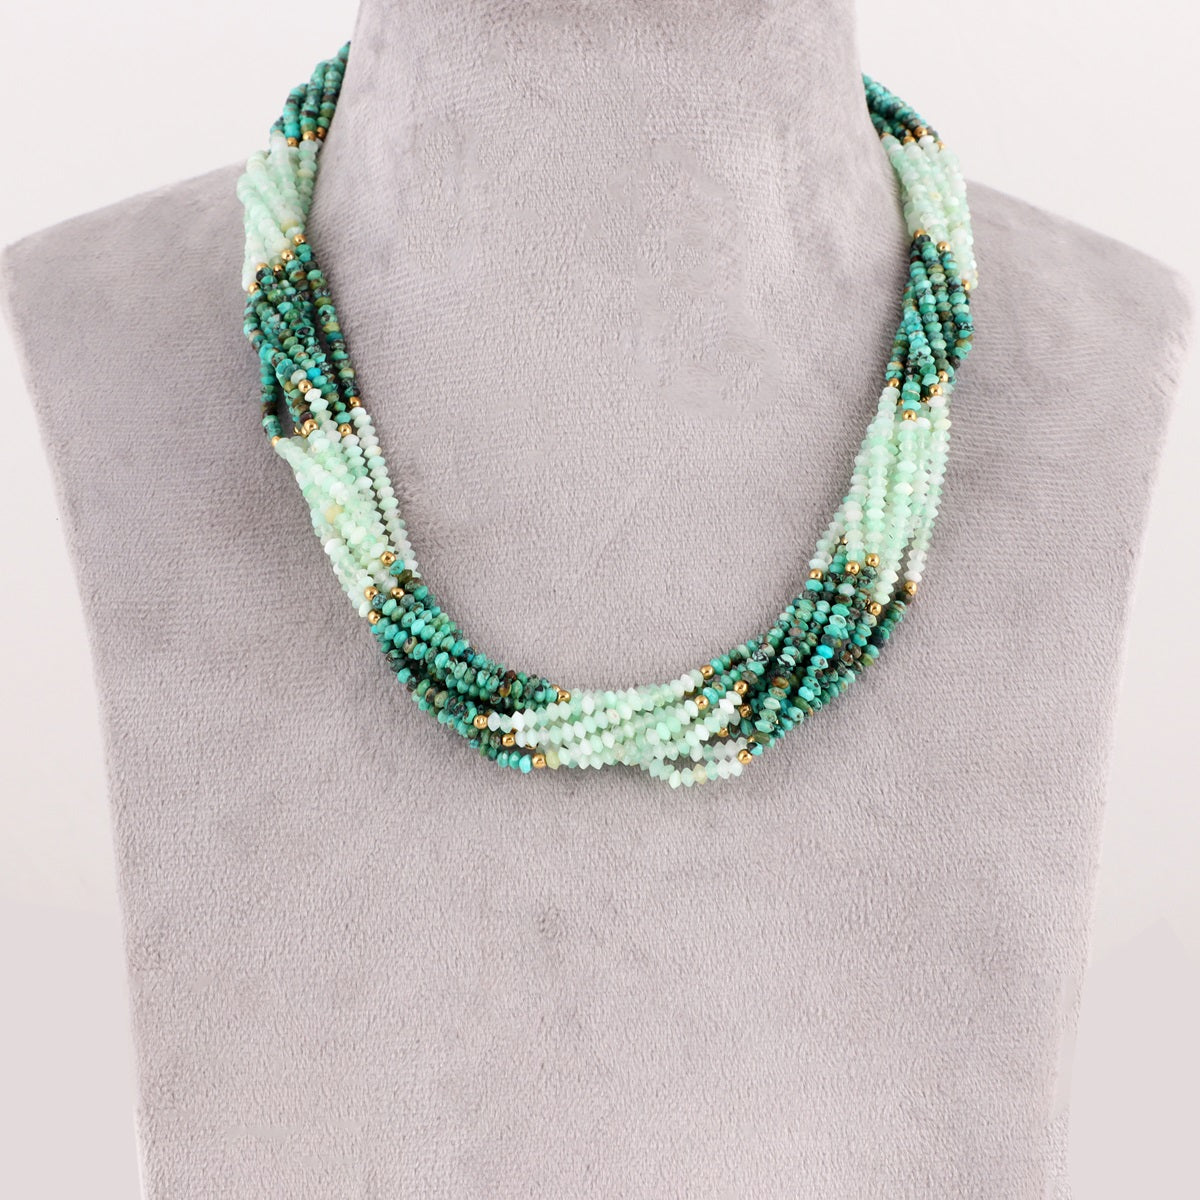 Layered Necklace Length - Adjustable for Perfect Fit